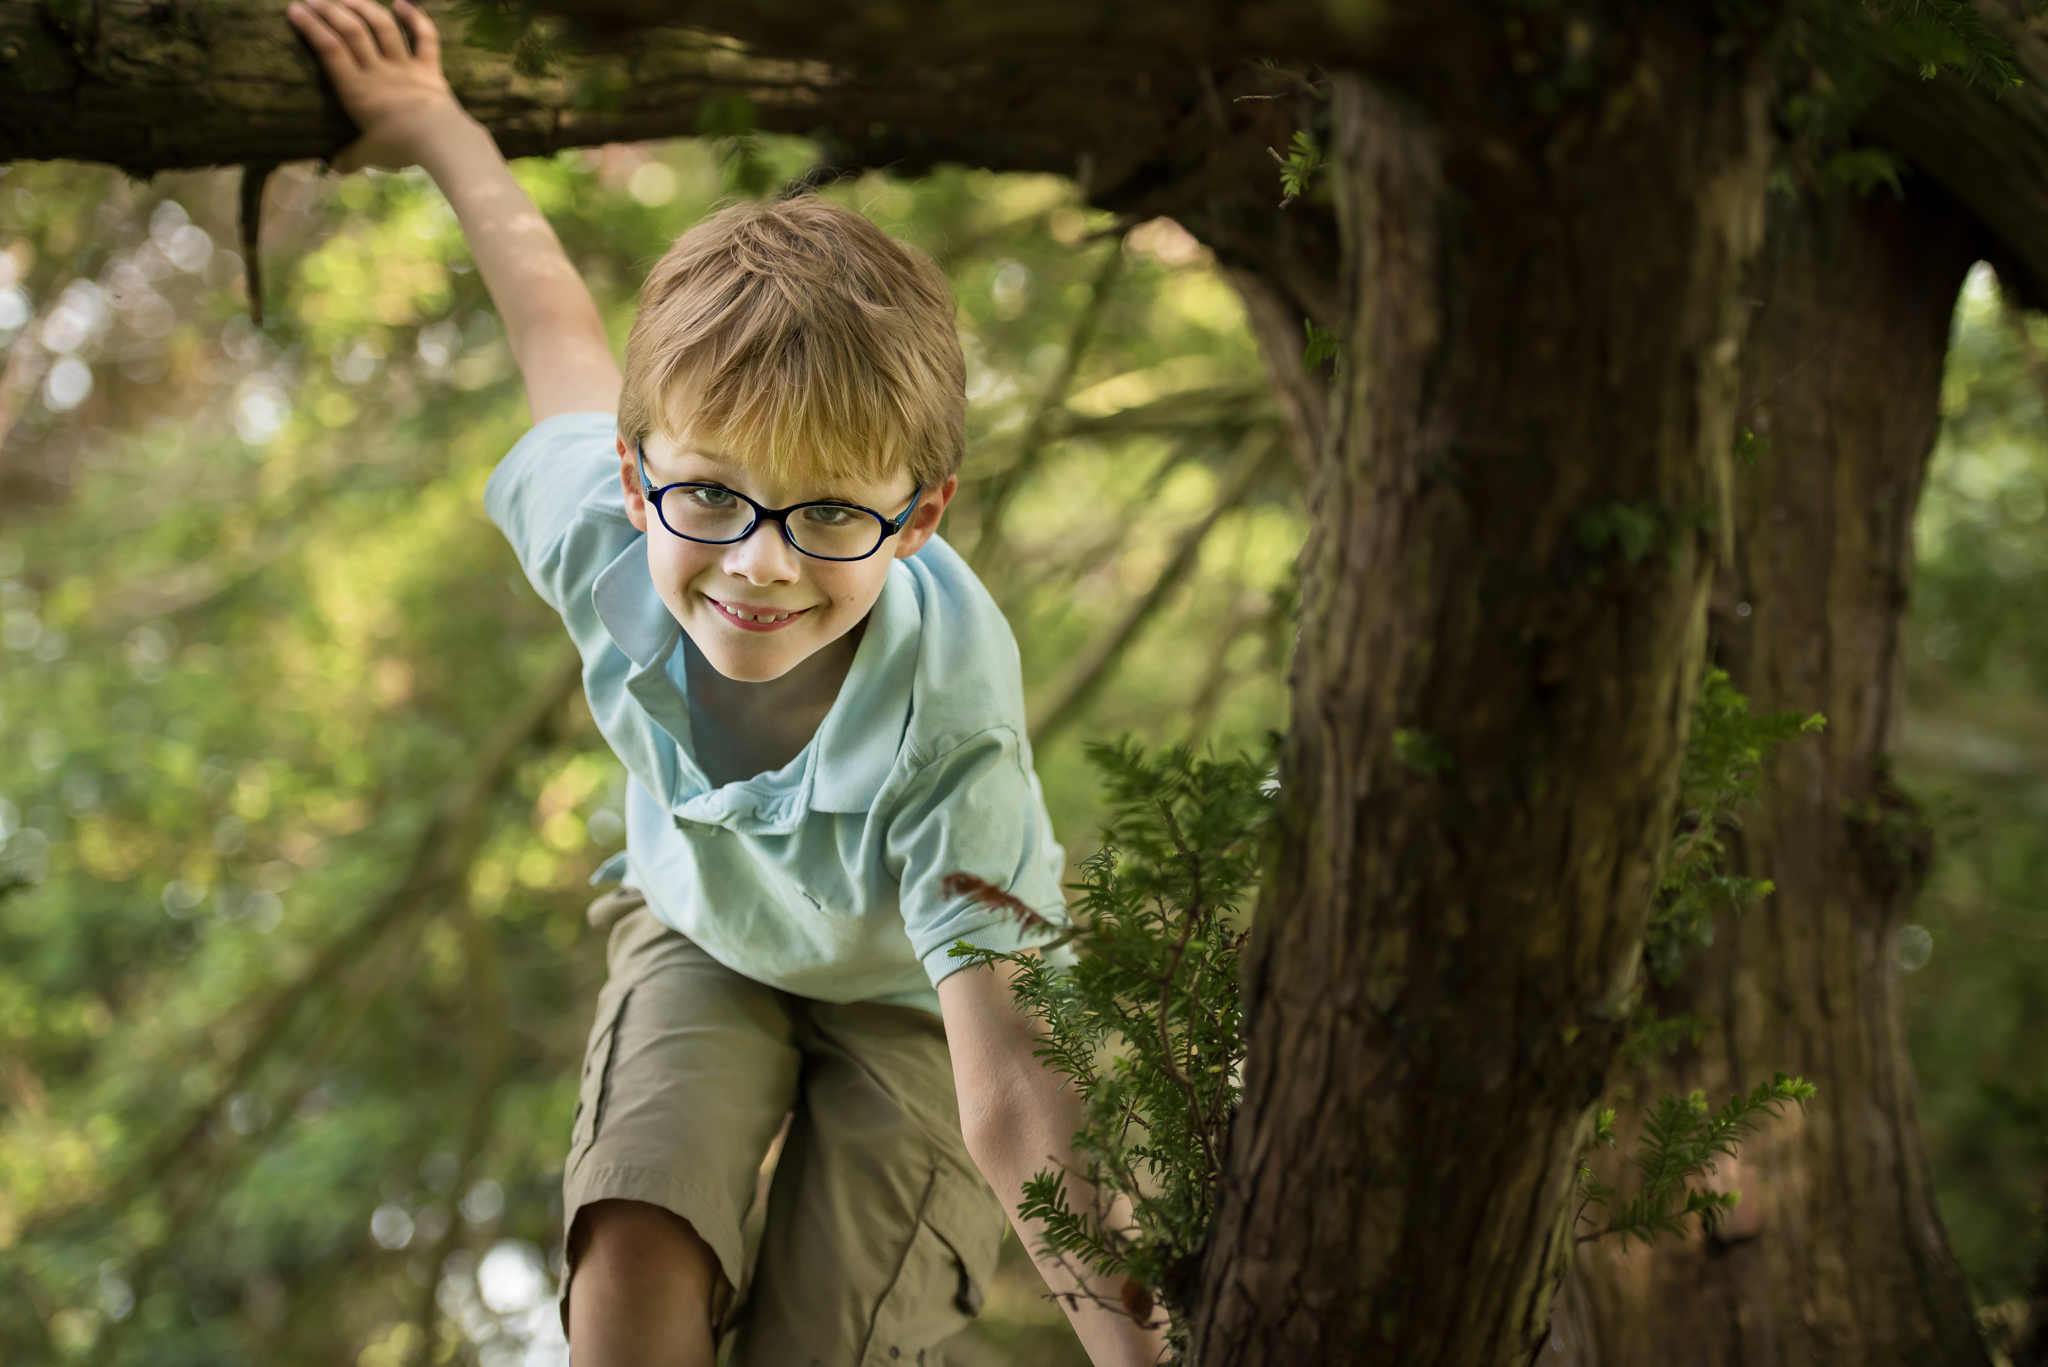 Best family photographer Edinburgh - little boy with glasses and blue t-shirt in tree